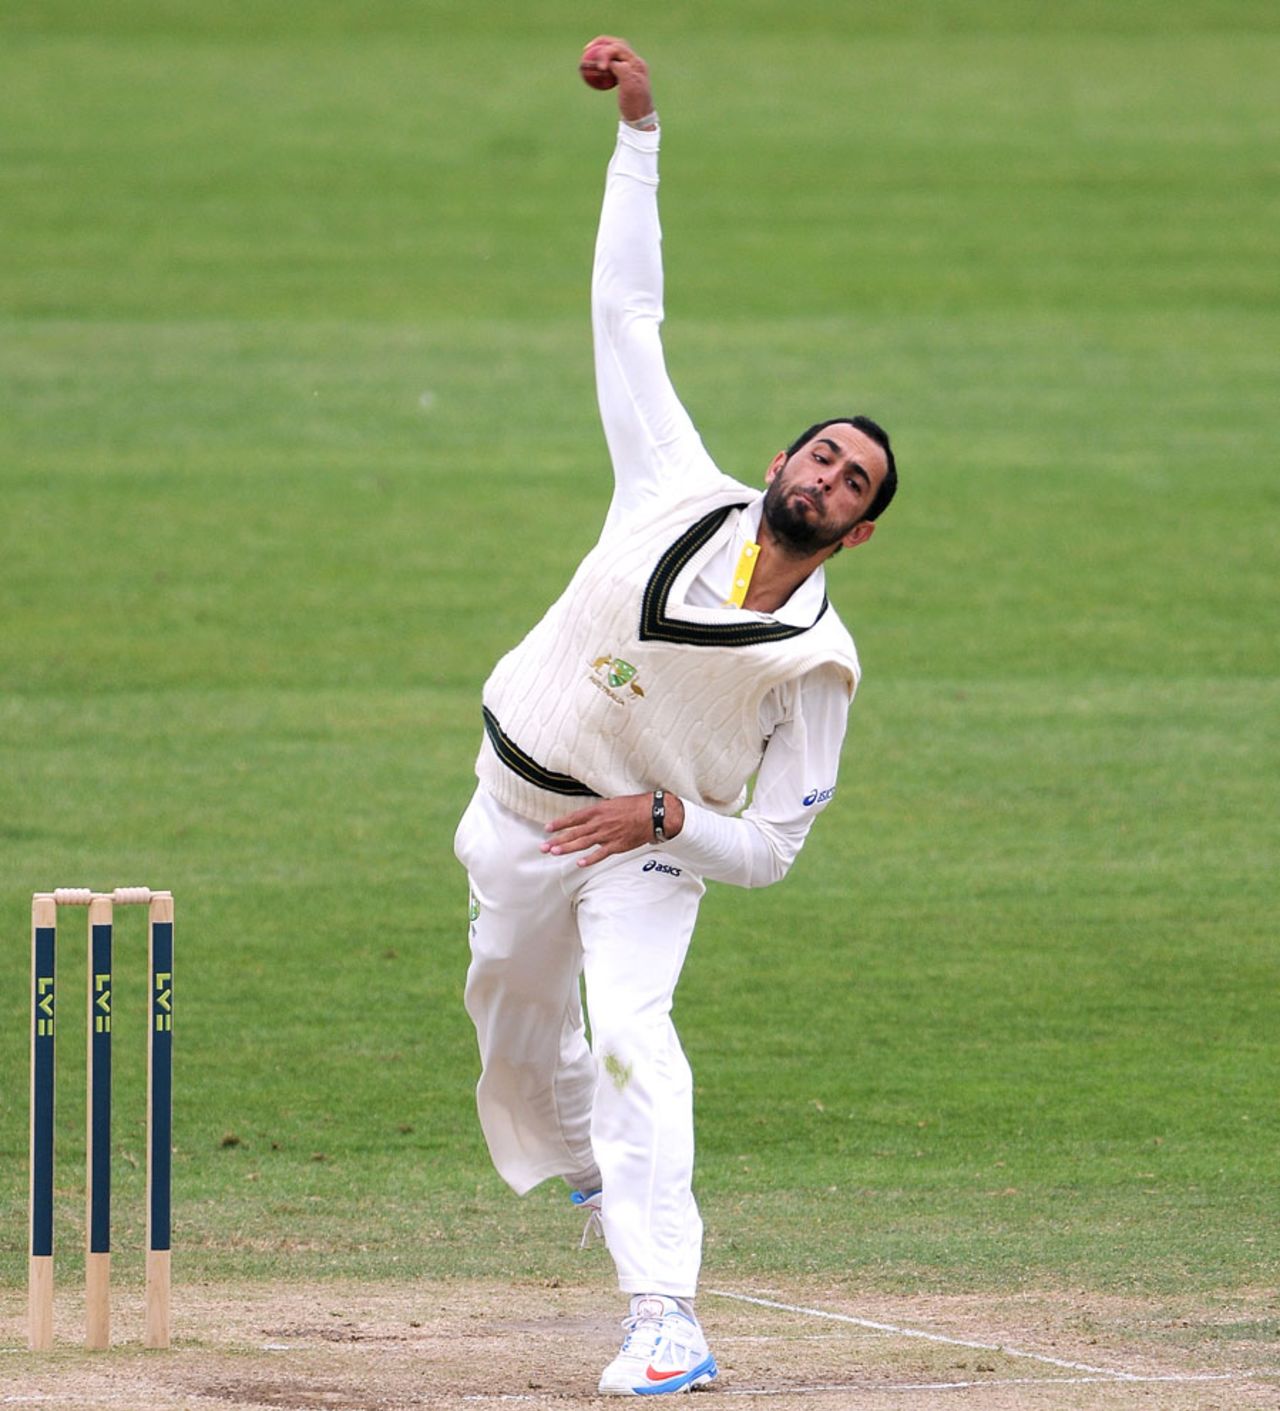 Fawad Ahmed in his delivery stride, Gloucestershire v Australia A, Tour match, Bristol, 2nd day, June 22, 2013